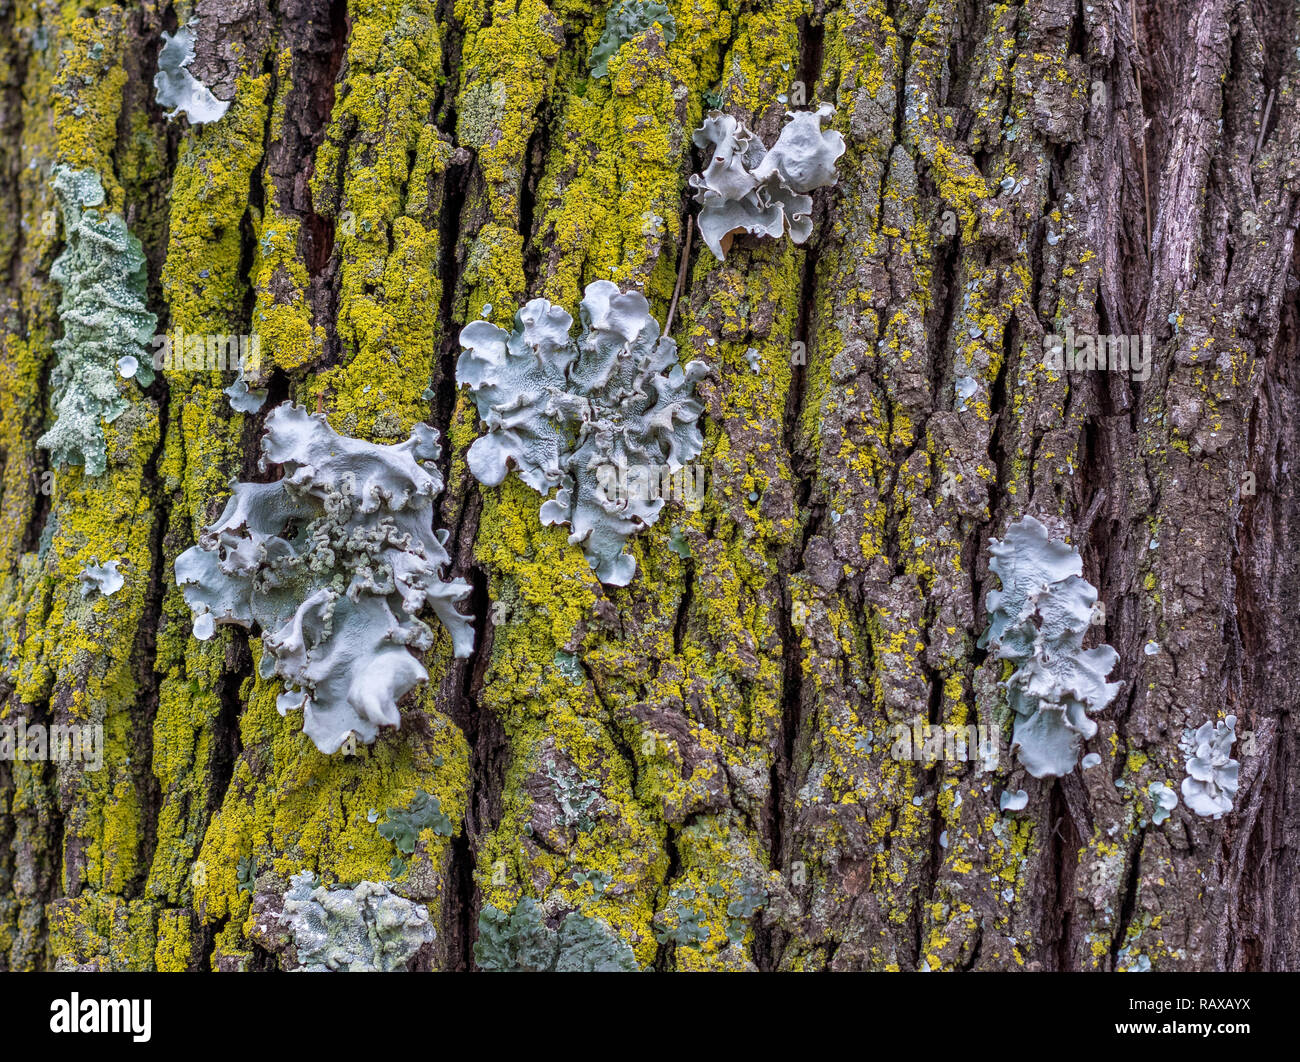 Lichens on the bark of a tree image with copy space Stock Photo